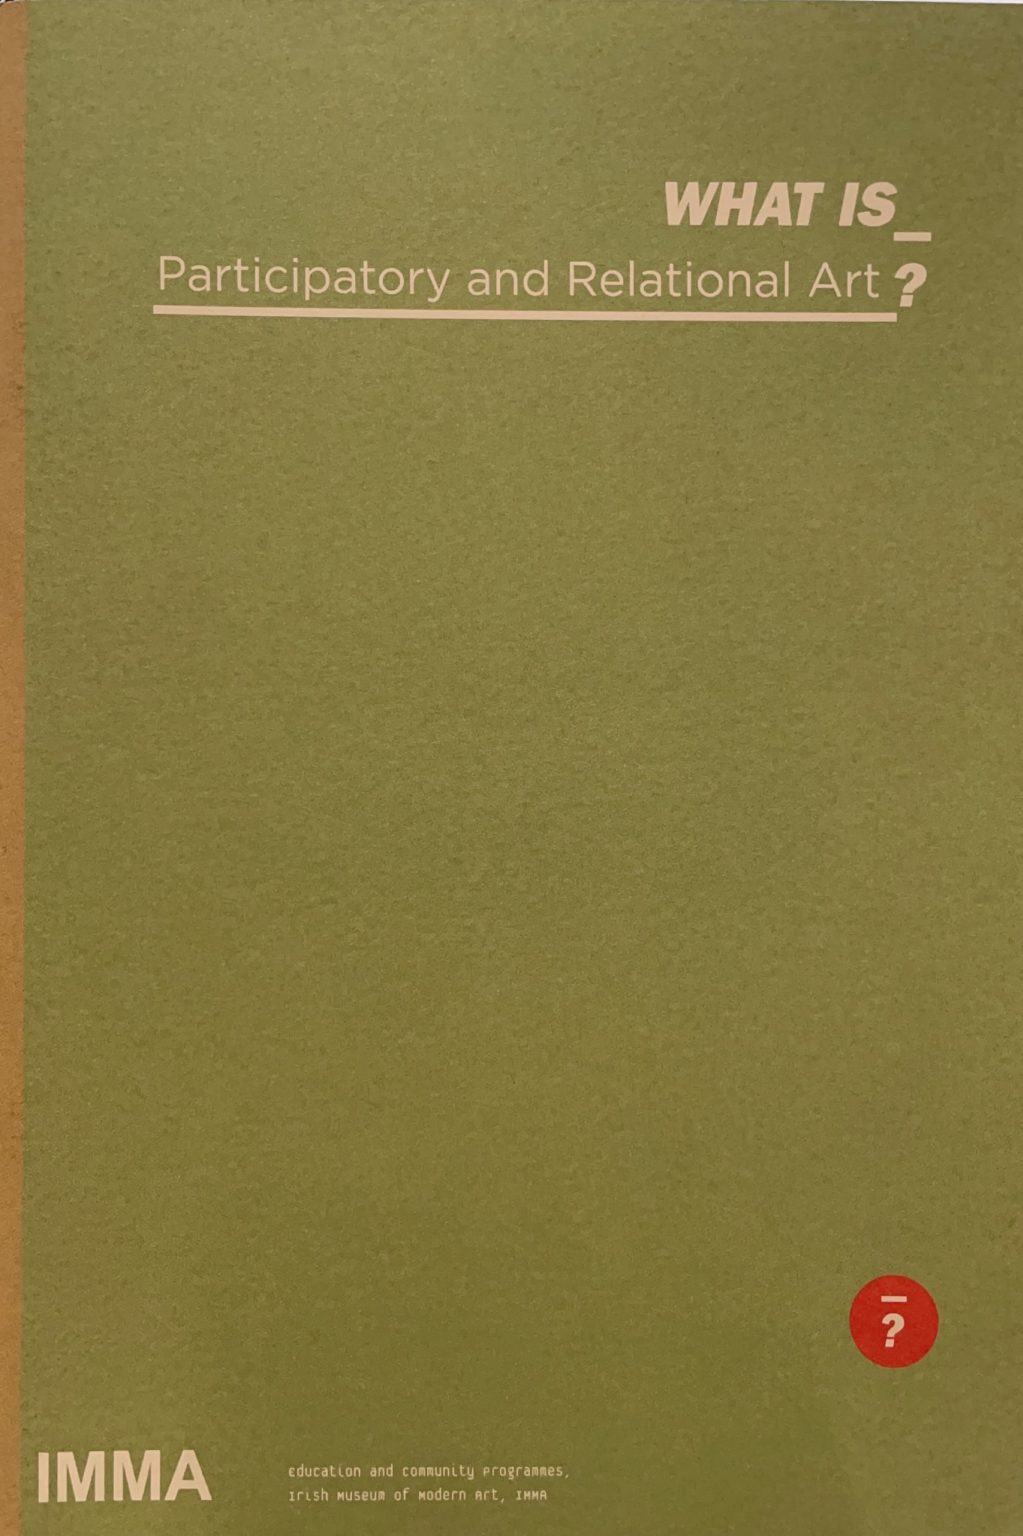 Participatory-and-Relational-Art-1-1023x1536